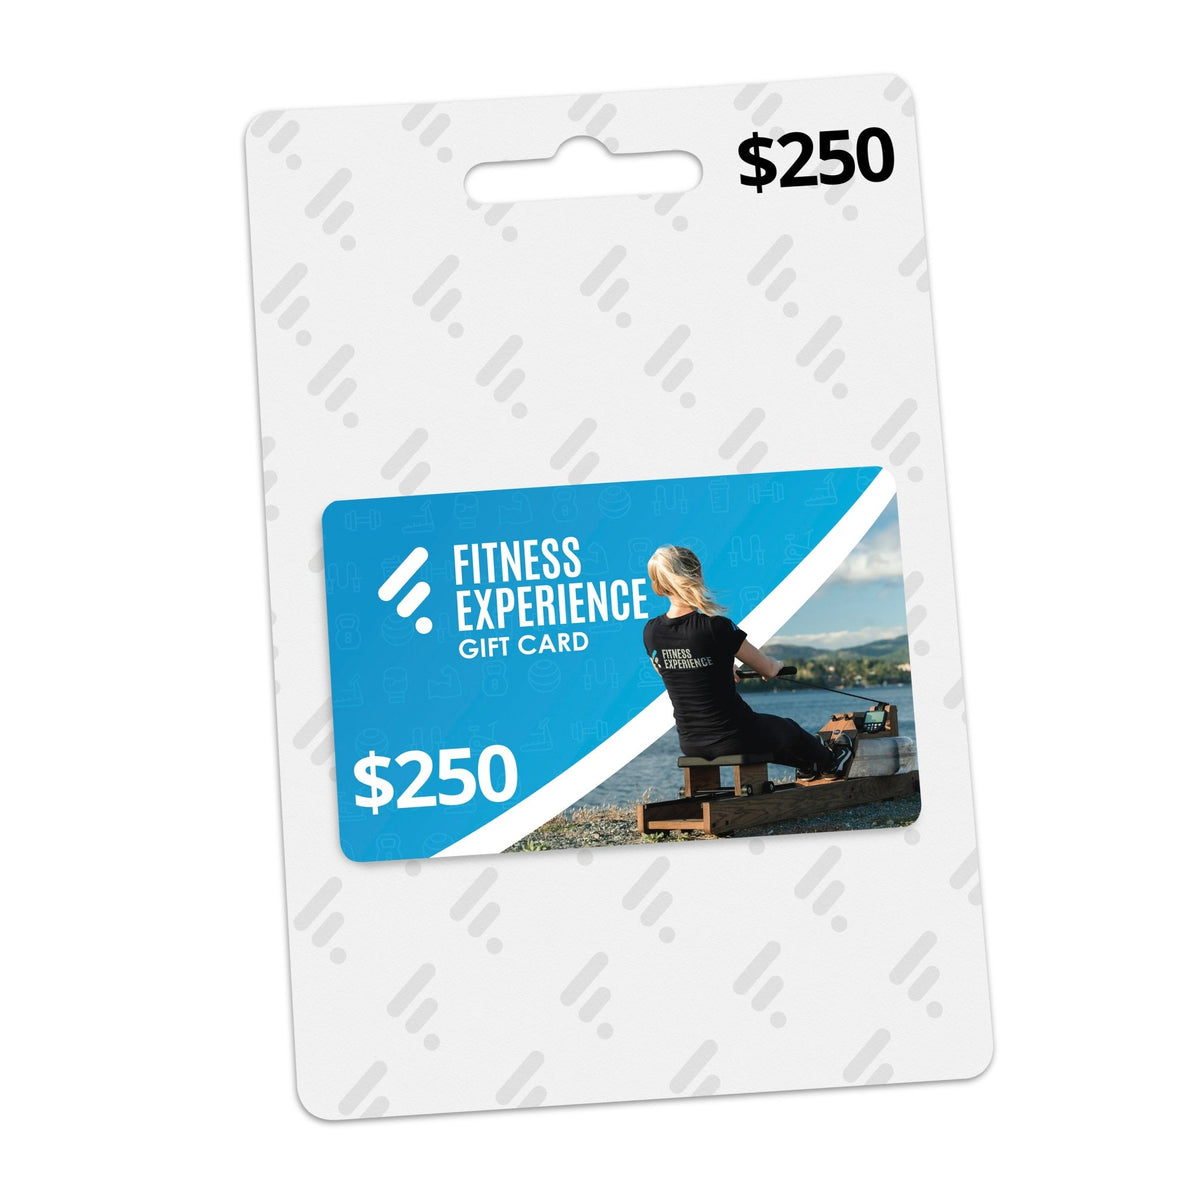 Fitness Experience $250 Digital Gift Card - Fitness Experience